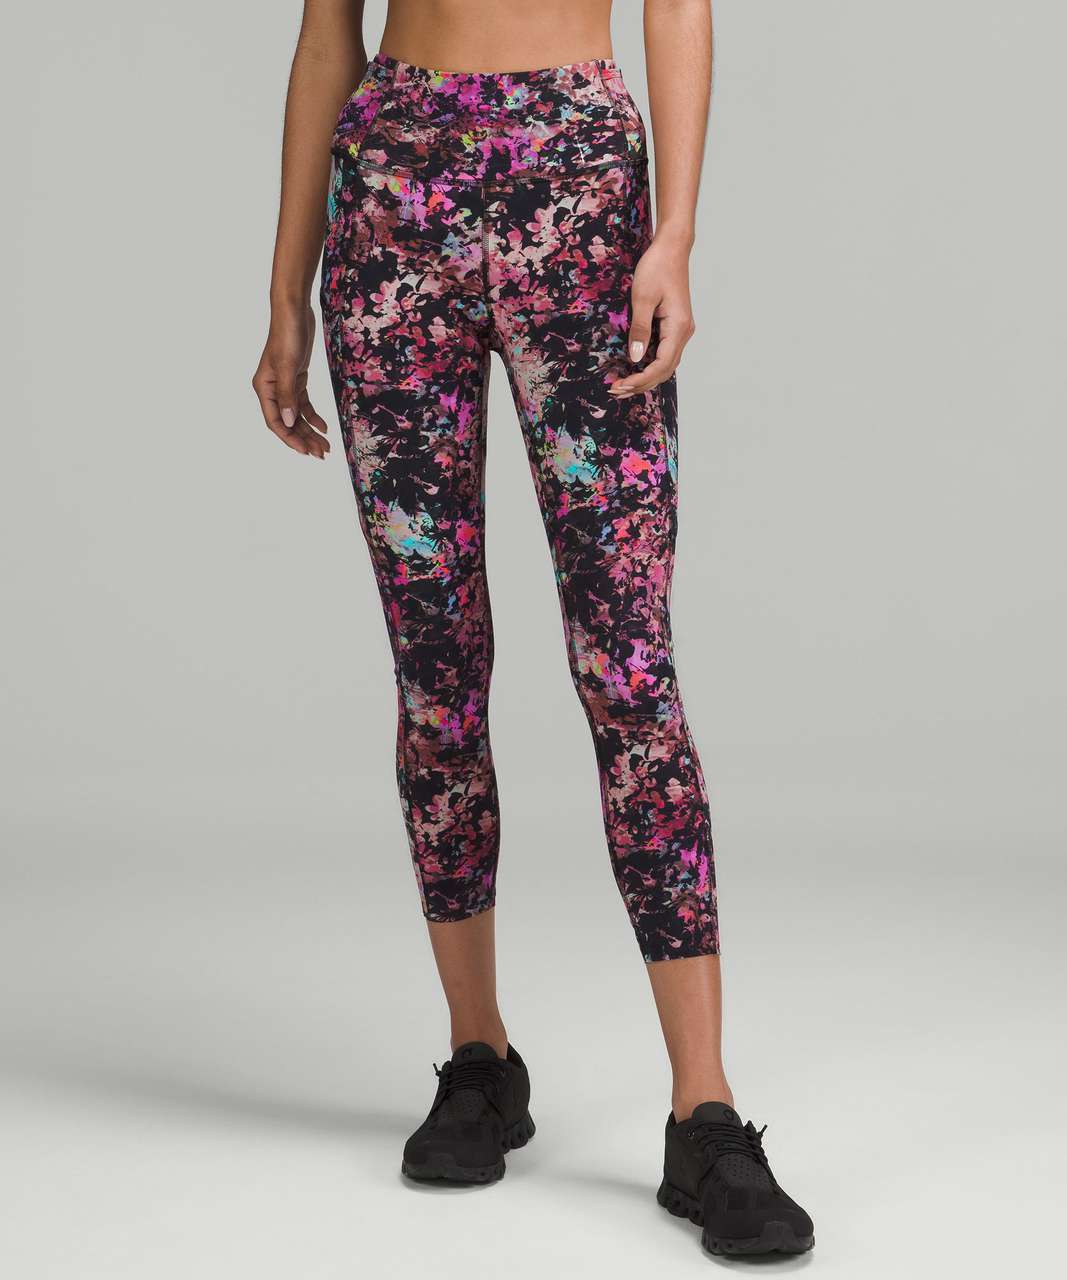 Lululemon Fast and Free High-Rise Crop 23" - Stencil Blossom Red Multi